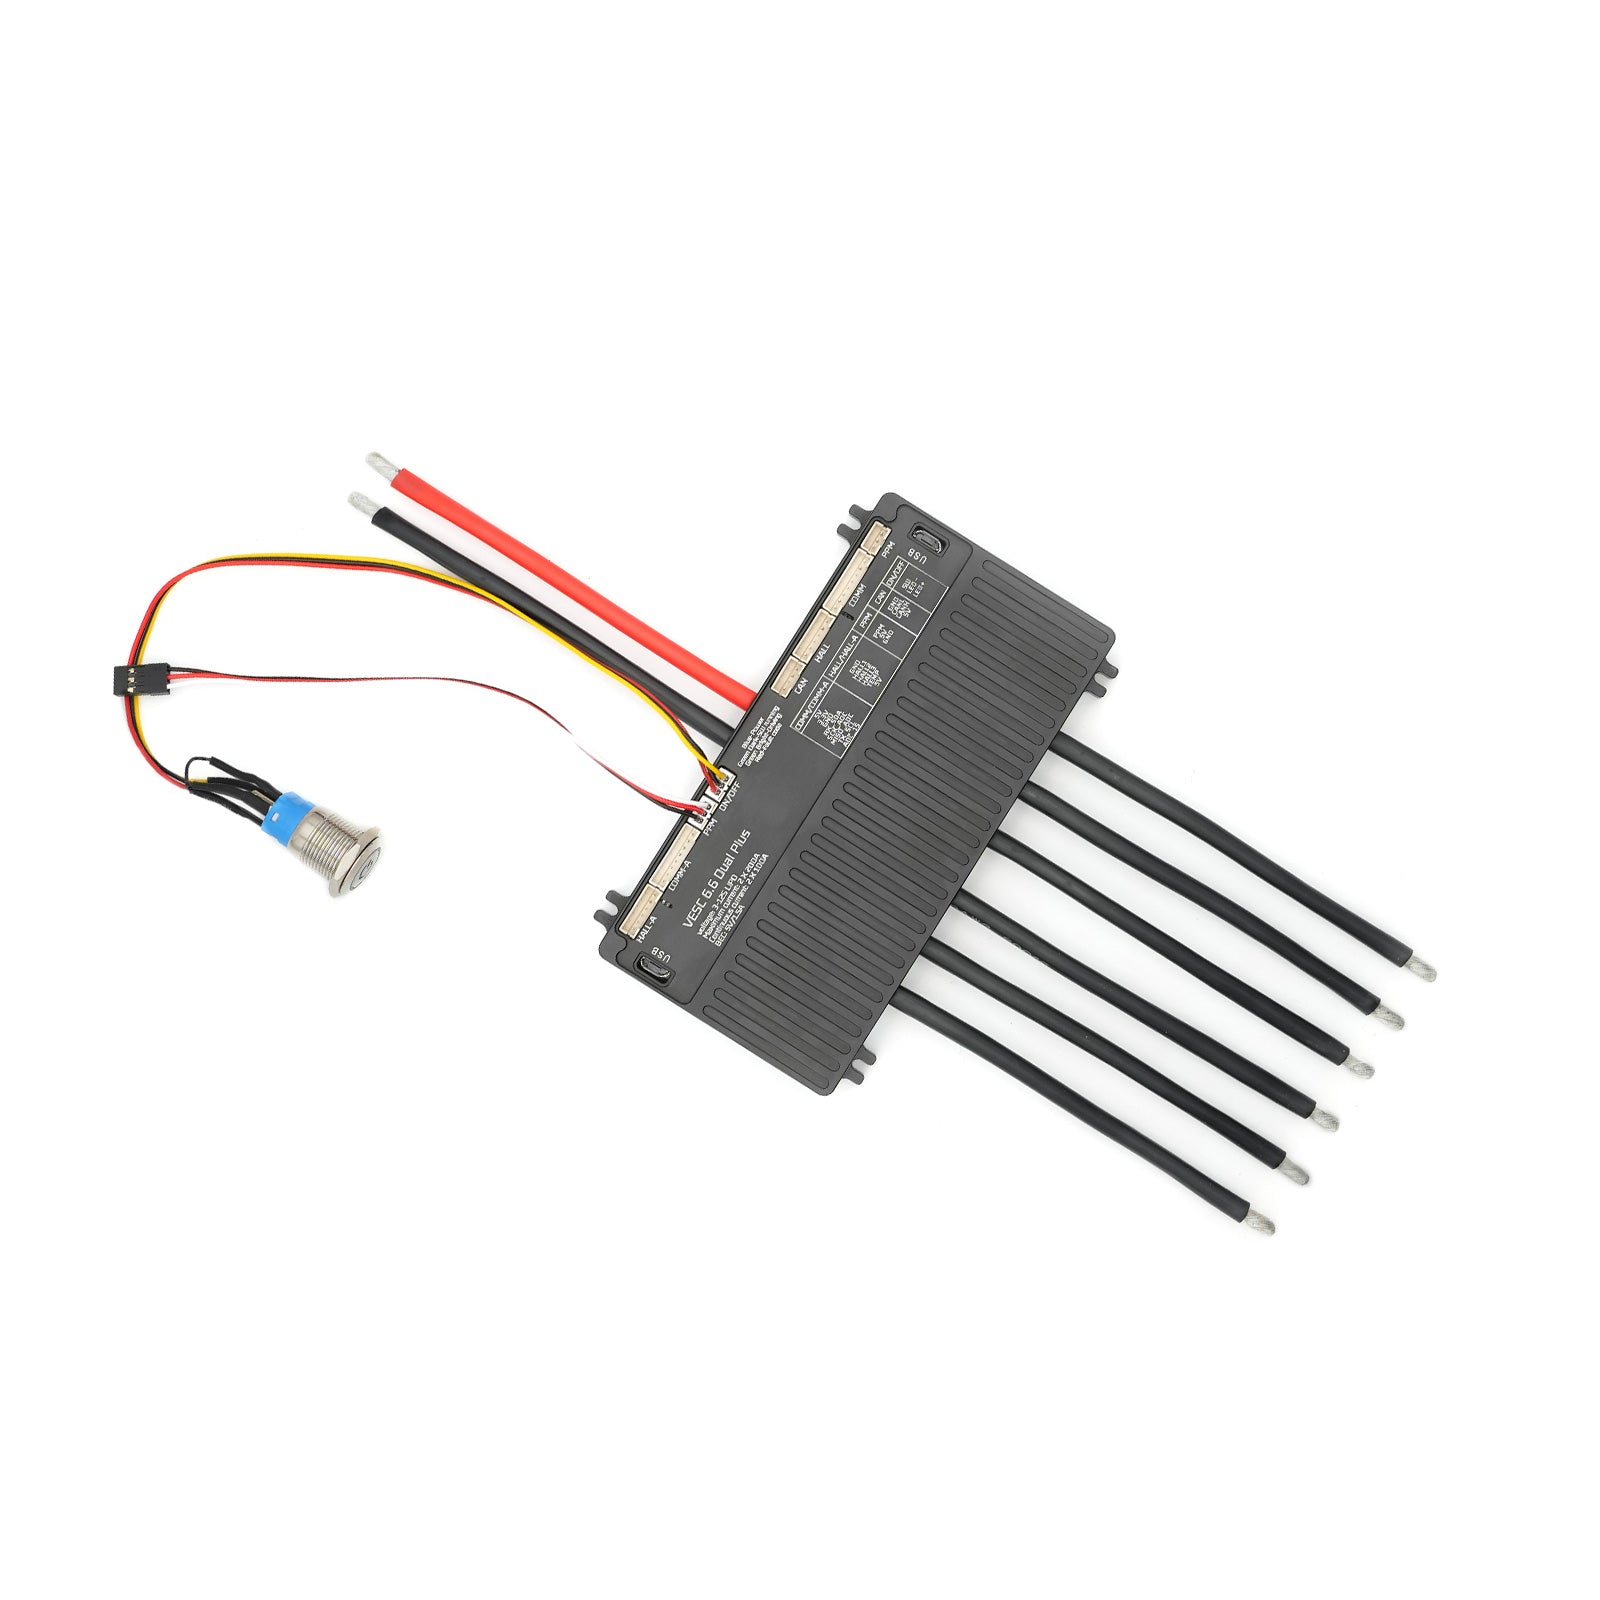 VESC 6 Dual Drive Motor Controller for Off-Road Electric Skateboard ESK and Scooter